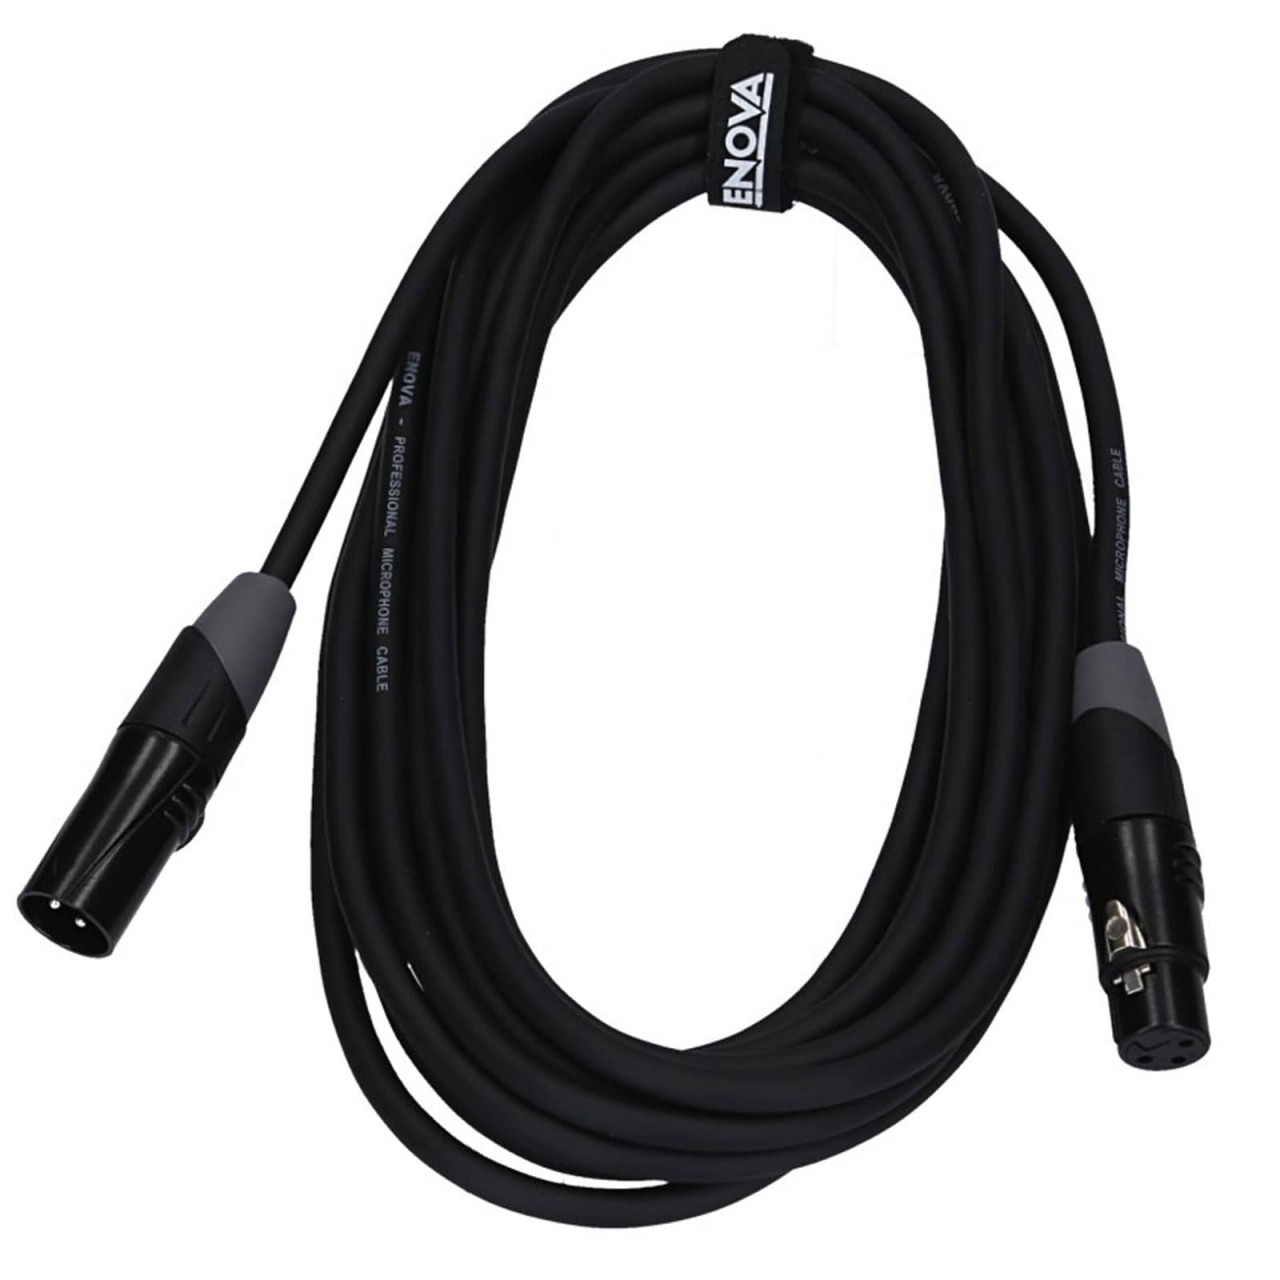 6 m XLR cable 3 pin - AES/EBU cable 110 Ohm - Flexible balanced audio cable in 6 meter length